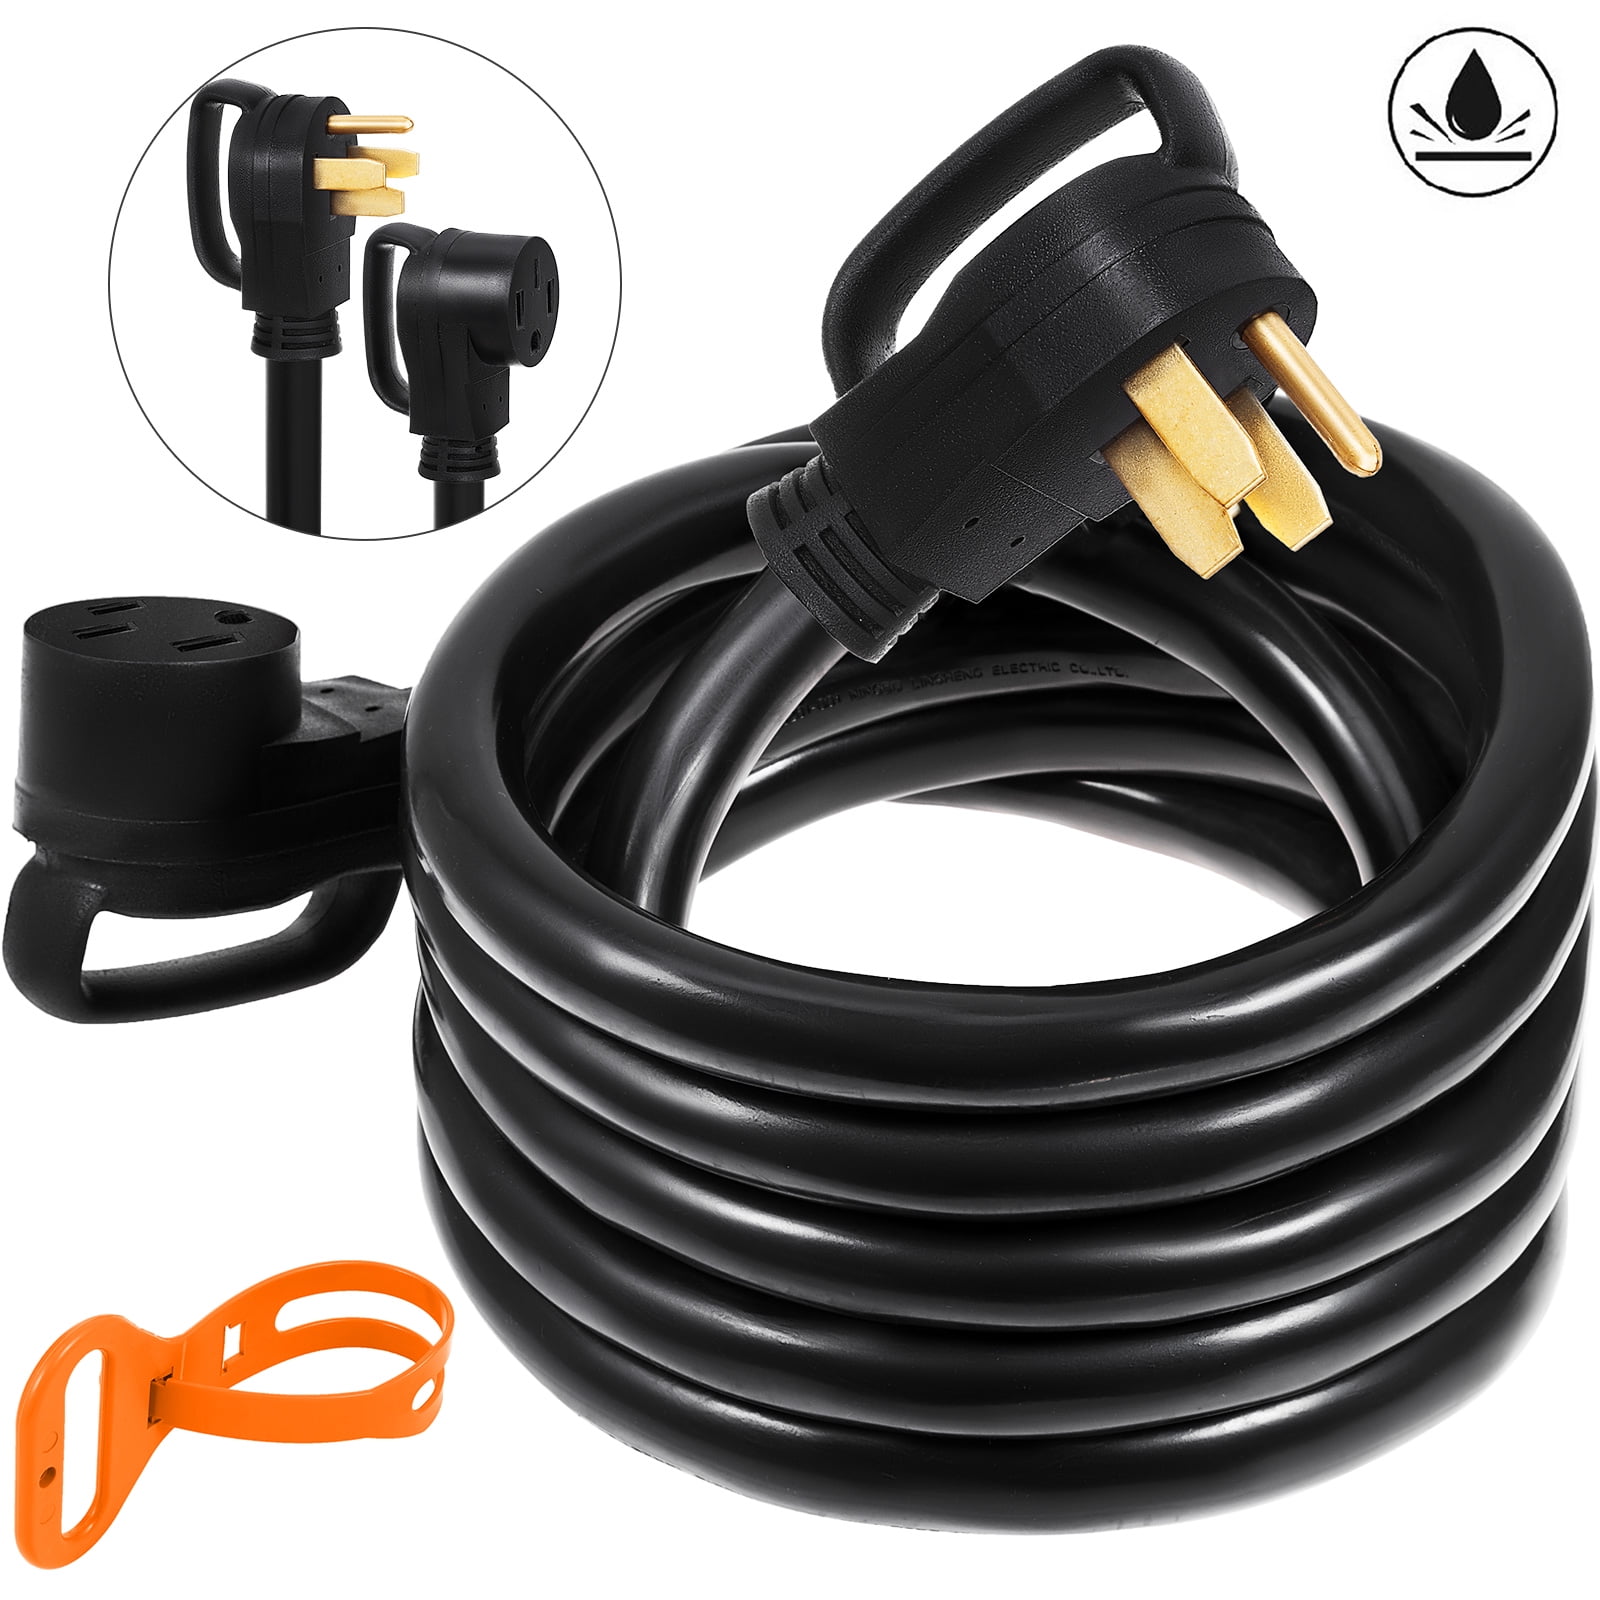 BENTISM Heavy Duty 50 ft 50 Amp RV Extension Cord Power Supply Cable  w/Molded Connector&Handles 125 / 250V 